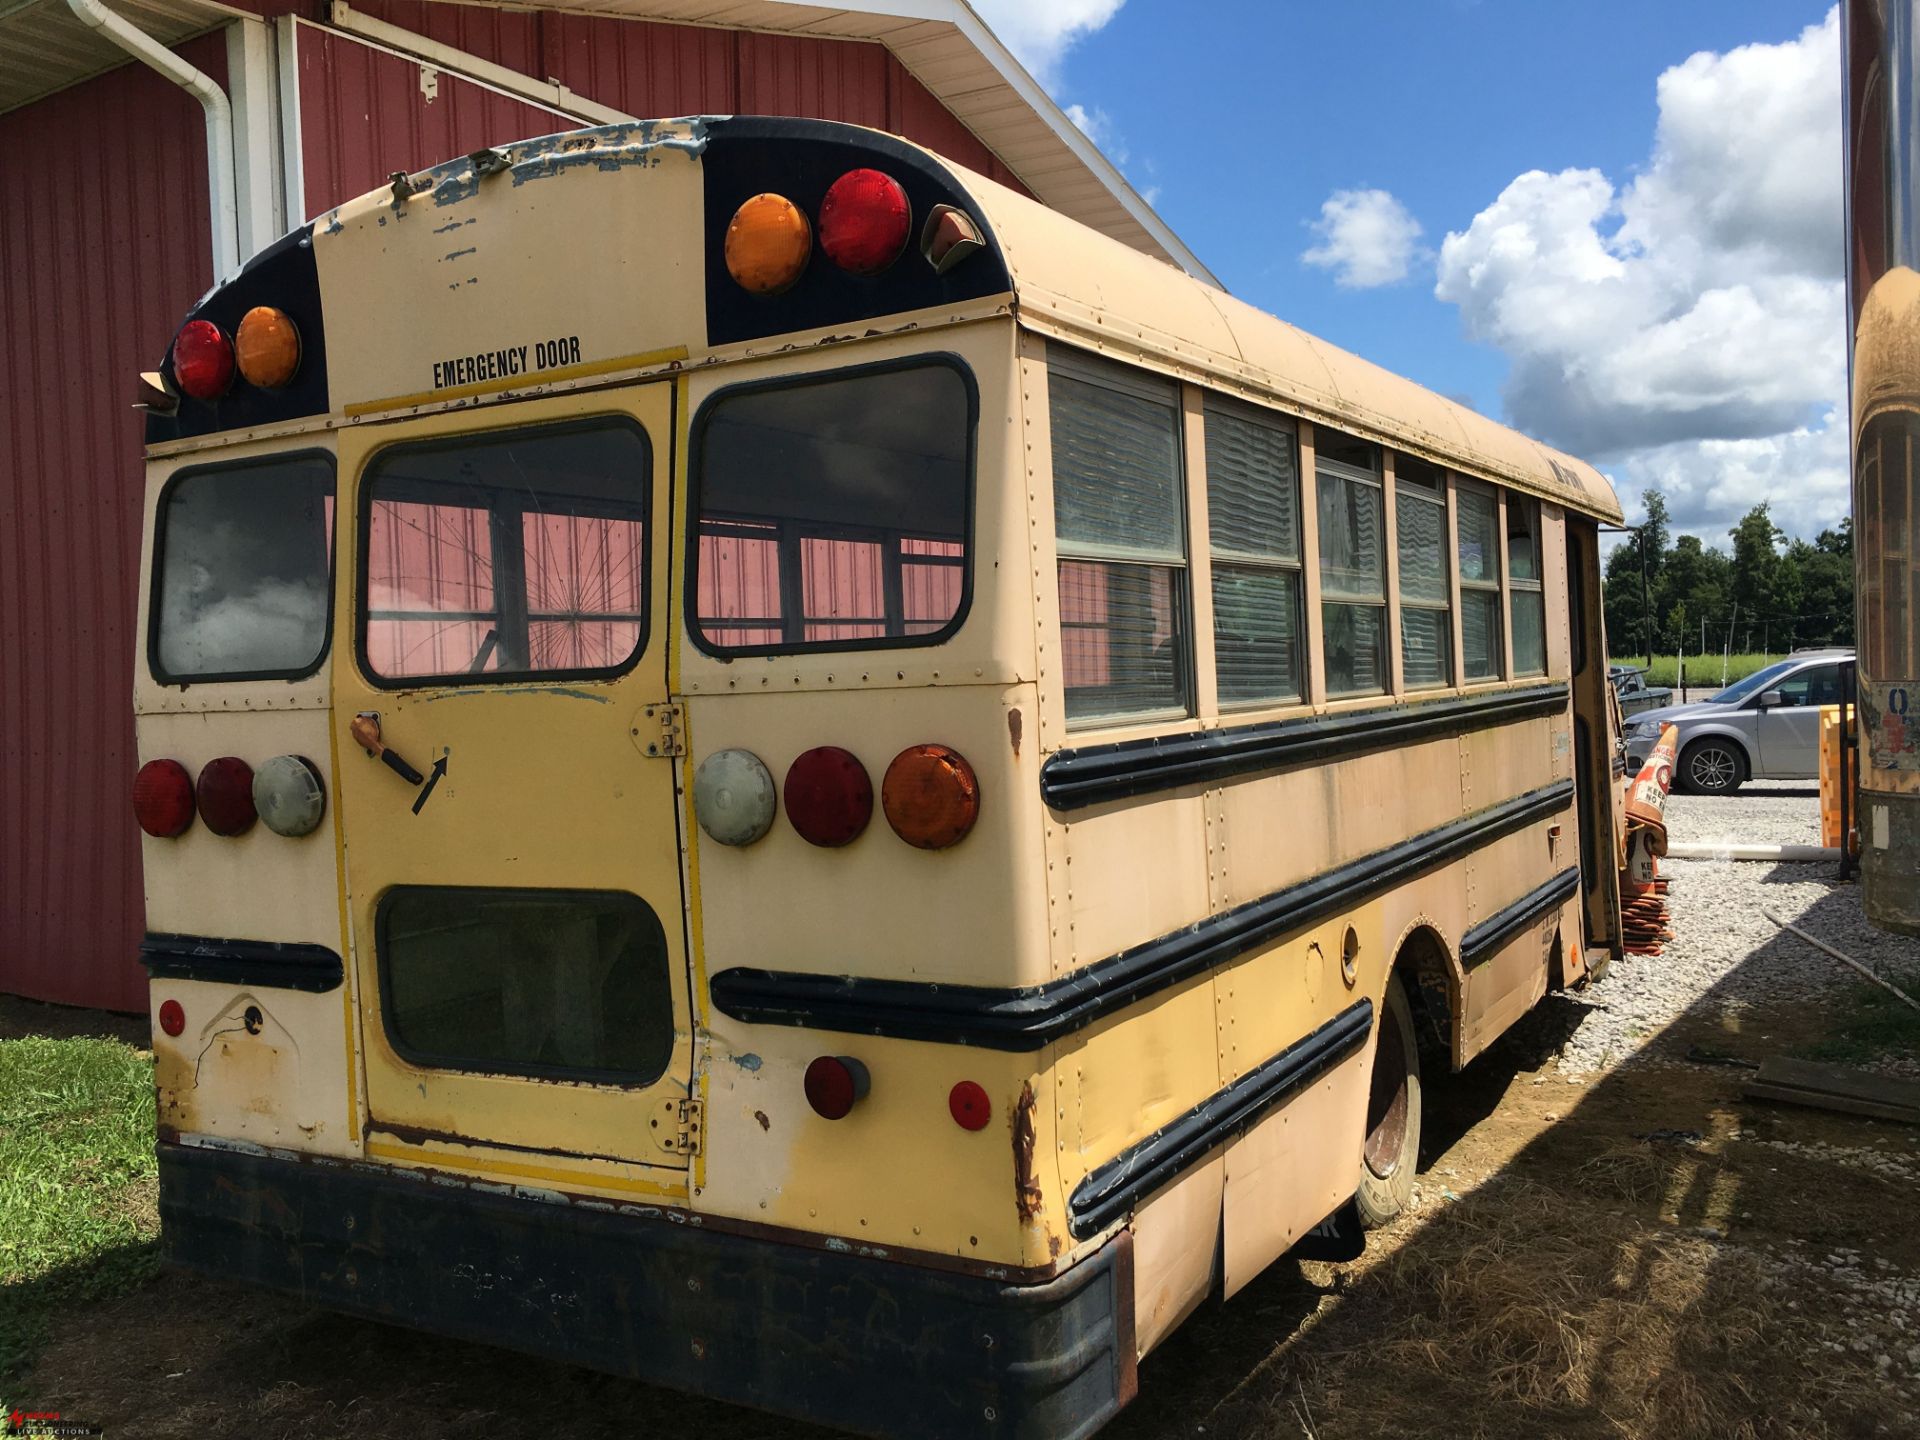 1993 CROWN MINI SCHOOL BUS, 350, AUTOMATIC, BEEN SITTING FOR A LONG TIME, DINGS/SCRATCHES/DENTS/ - Image 5 of 11